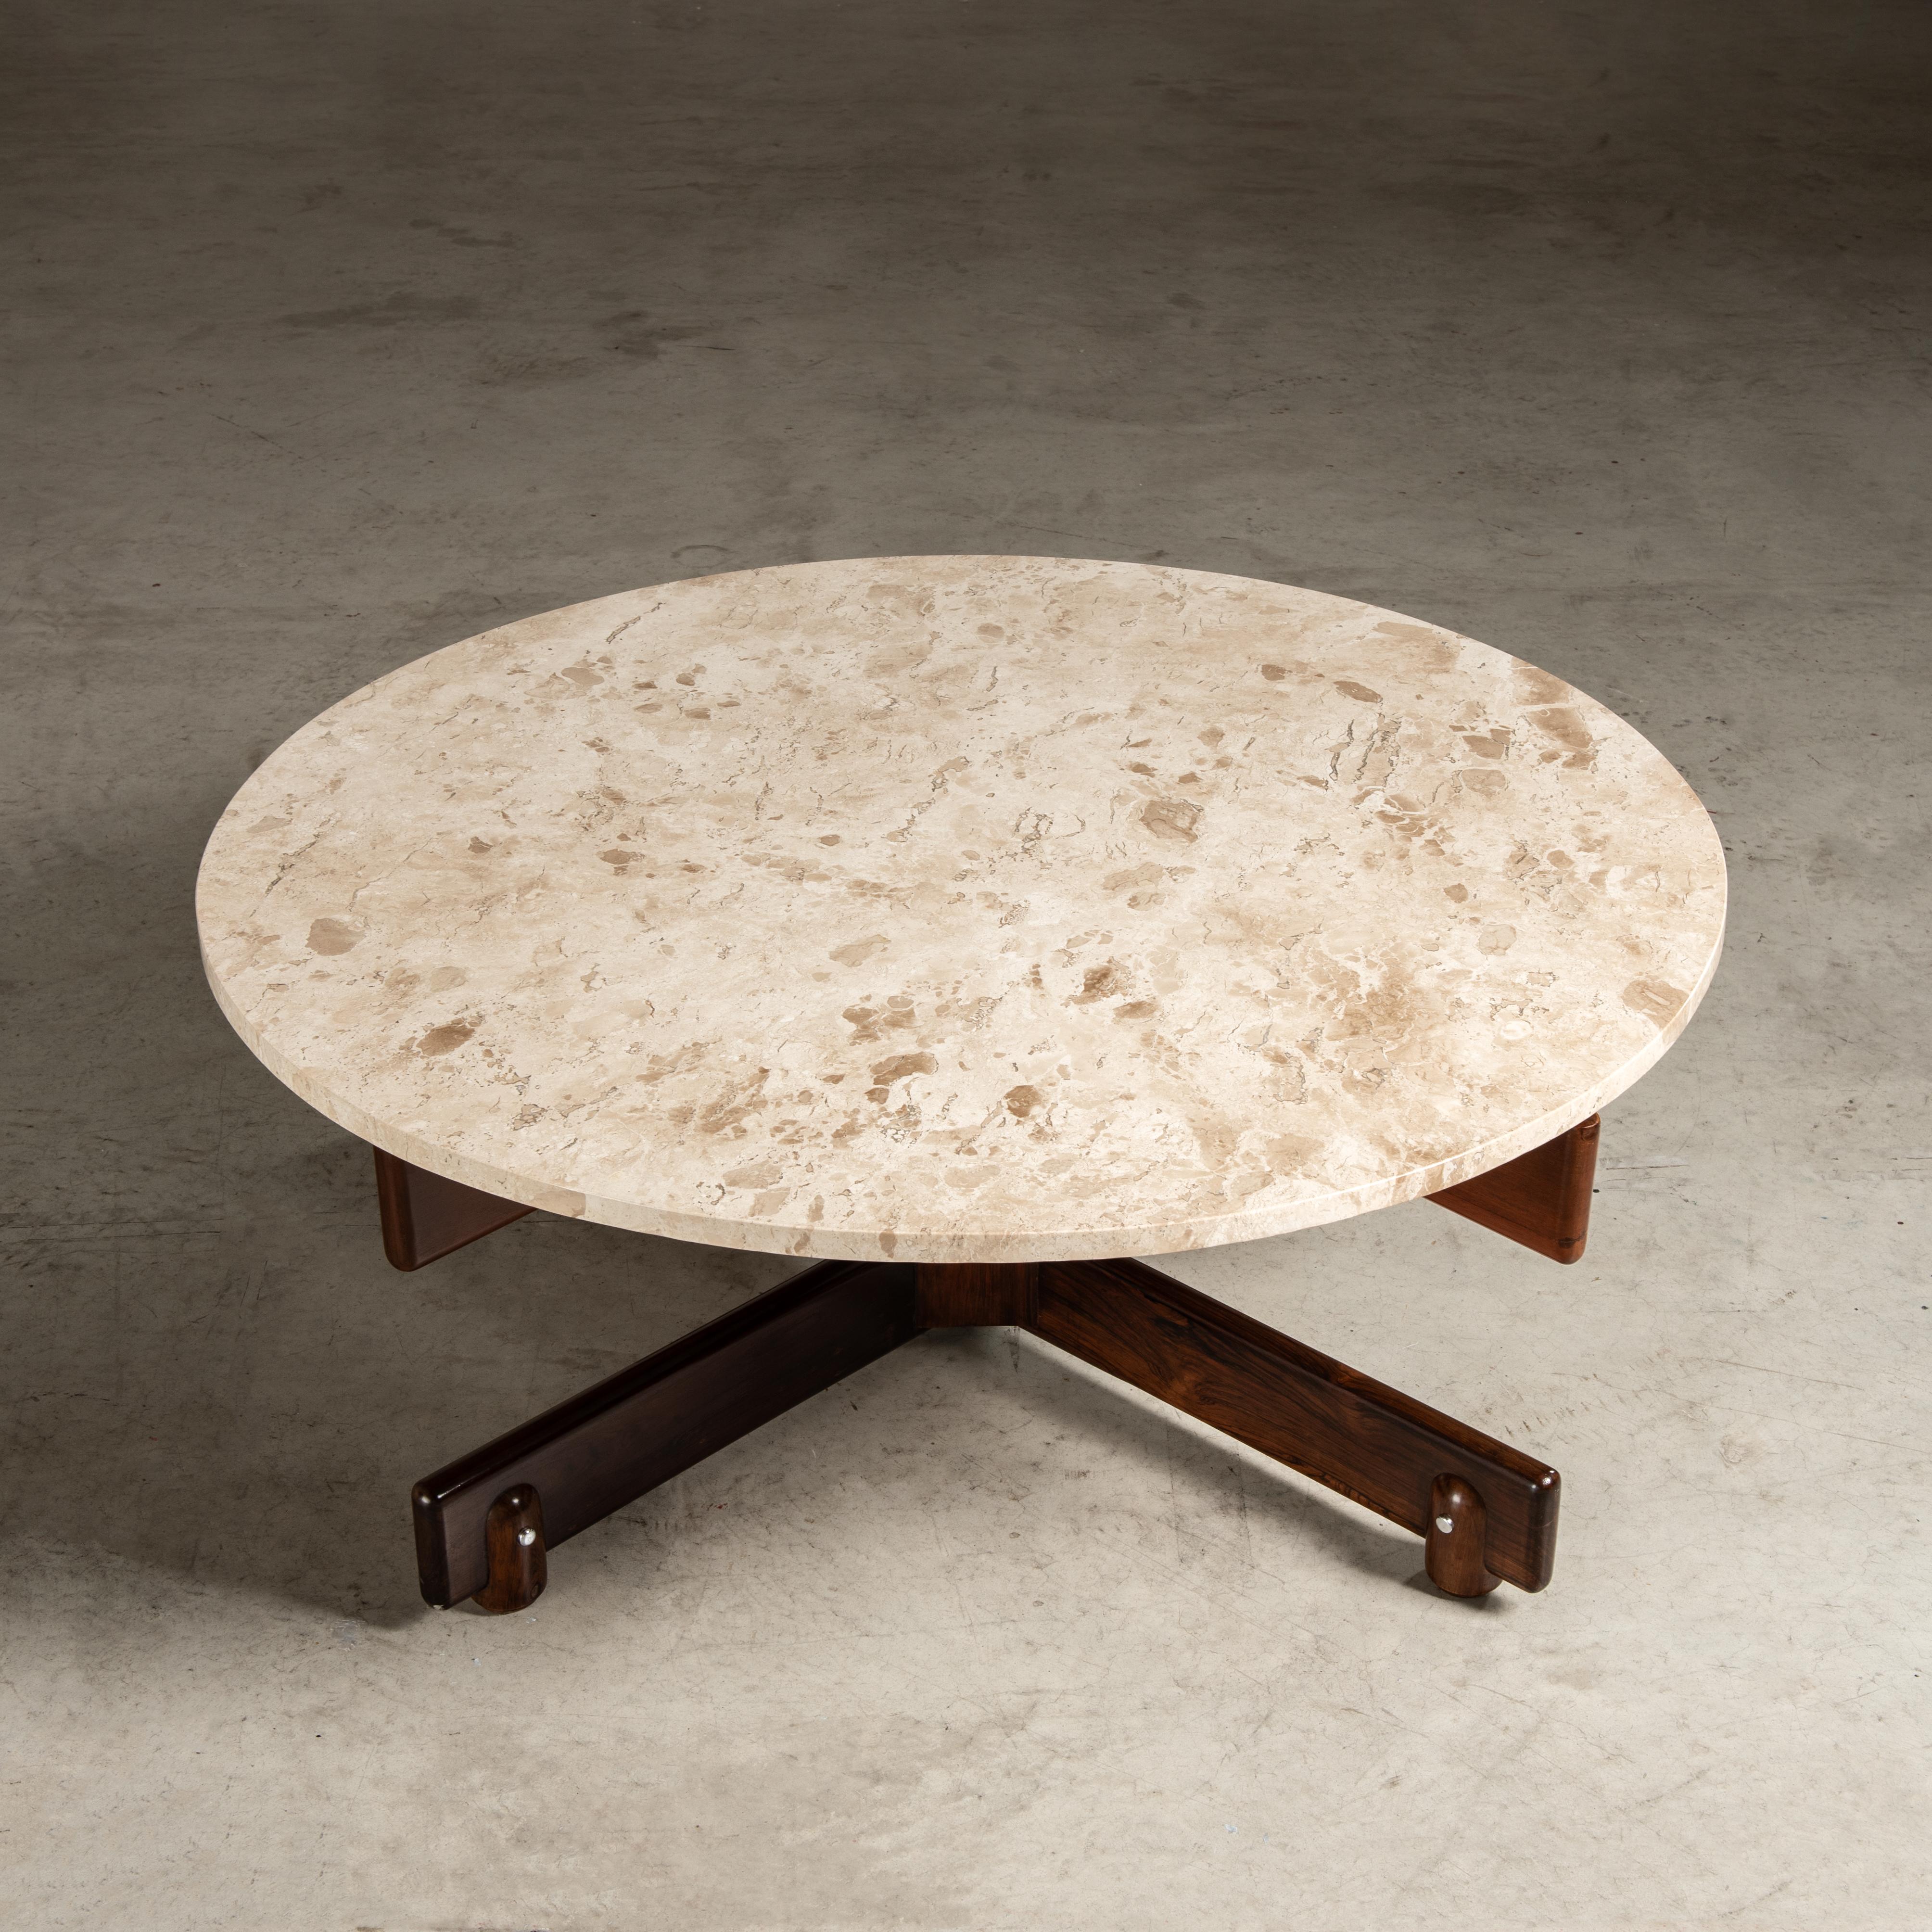 'Alex' Coffee Table in Marble and Wood, Sergio Rodrigues, Brazilian Mid-Century In Good Condition For Sale In Sao Paulo, SP